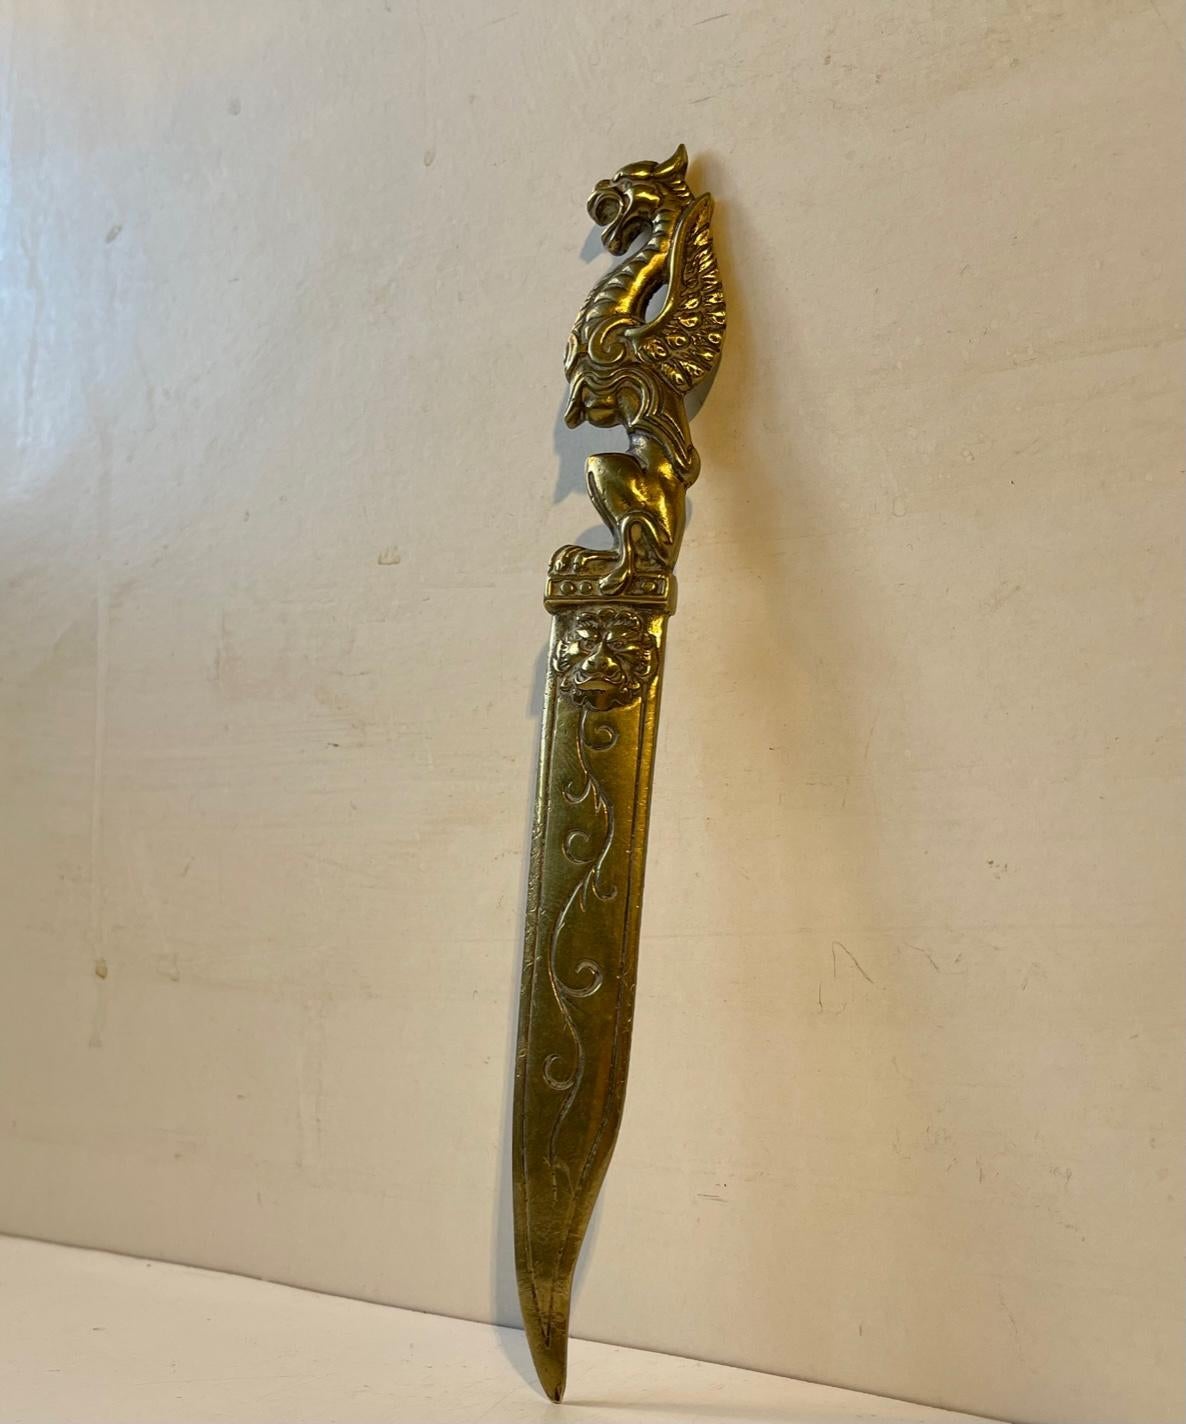 A circa 1920-30 fine quality English brass dragon letter opener or paper knife. It depicts the dragon from the legend of 'St. George and the Dragon'. The lion just below the main ornament represents England. Hollywood regency in style. It is well